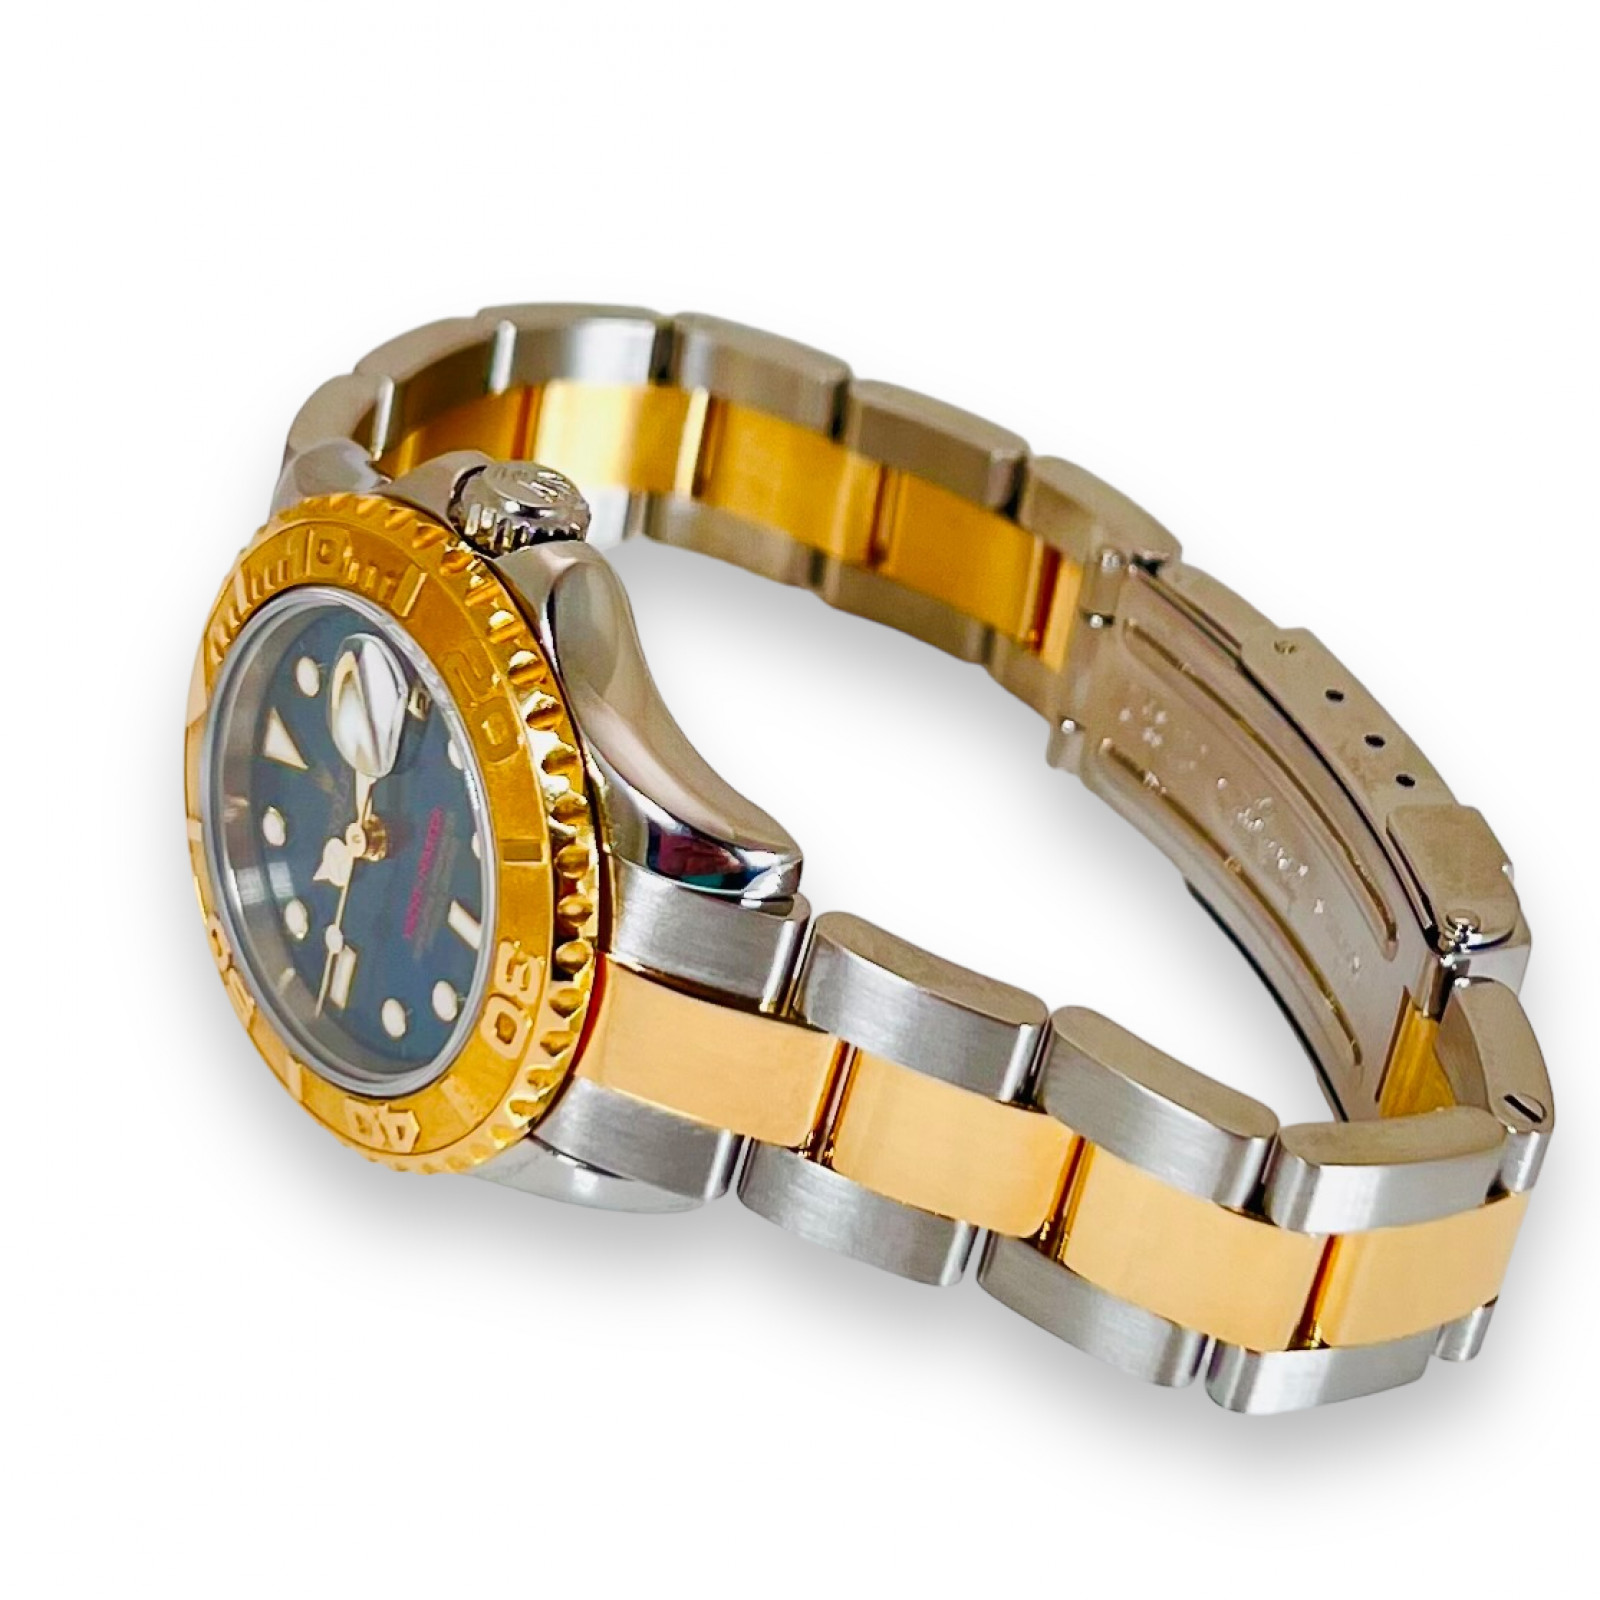 Pre-Owned Rolex Yacht-Master 169623